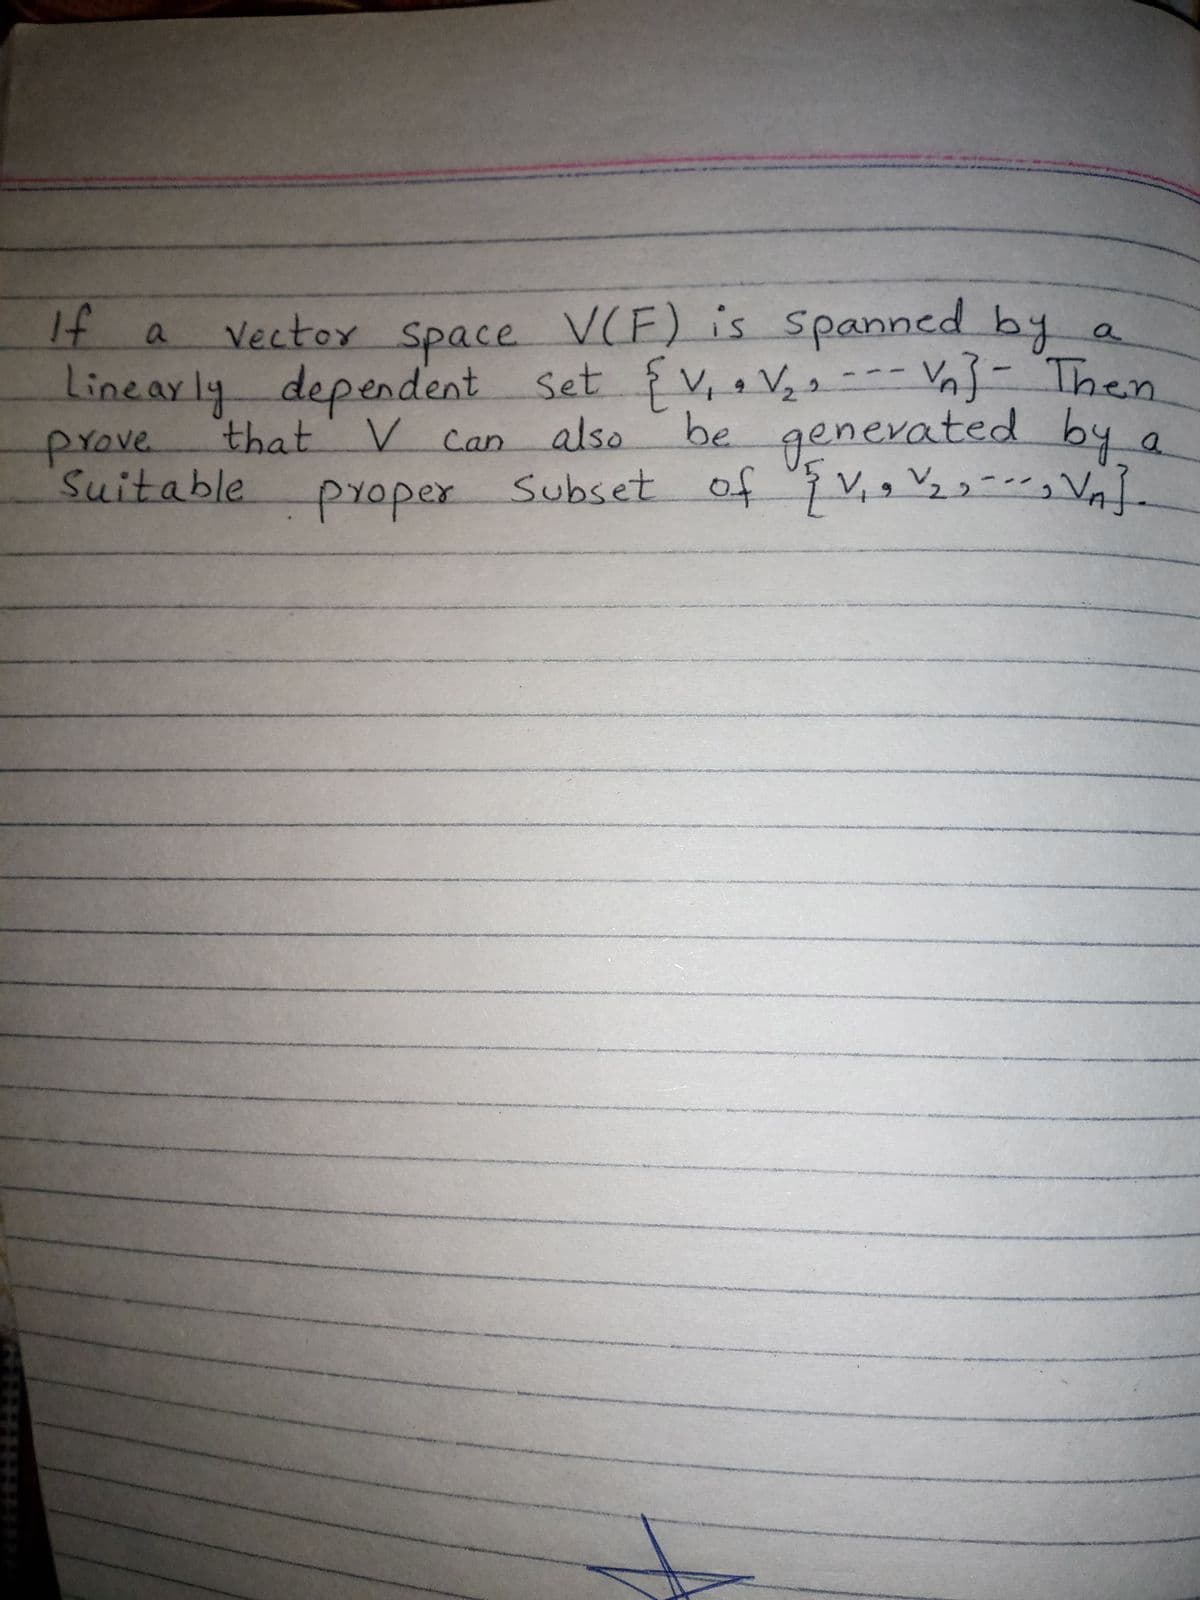 V(F) is spanned by a
--- Va}- "Then
that' v can also be genevated by
proper Subset of V, V-, Va
If a
Vector Space
Linearly dependent Set fv• Vz2
prove.
Suitable
